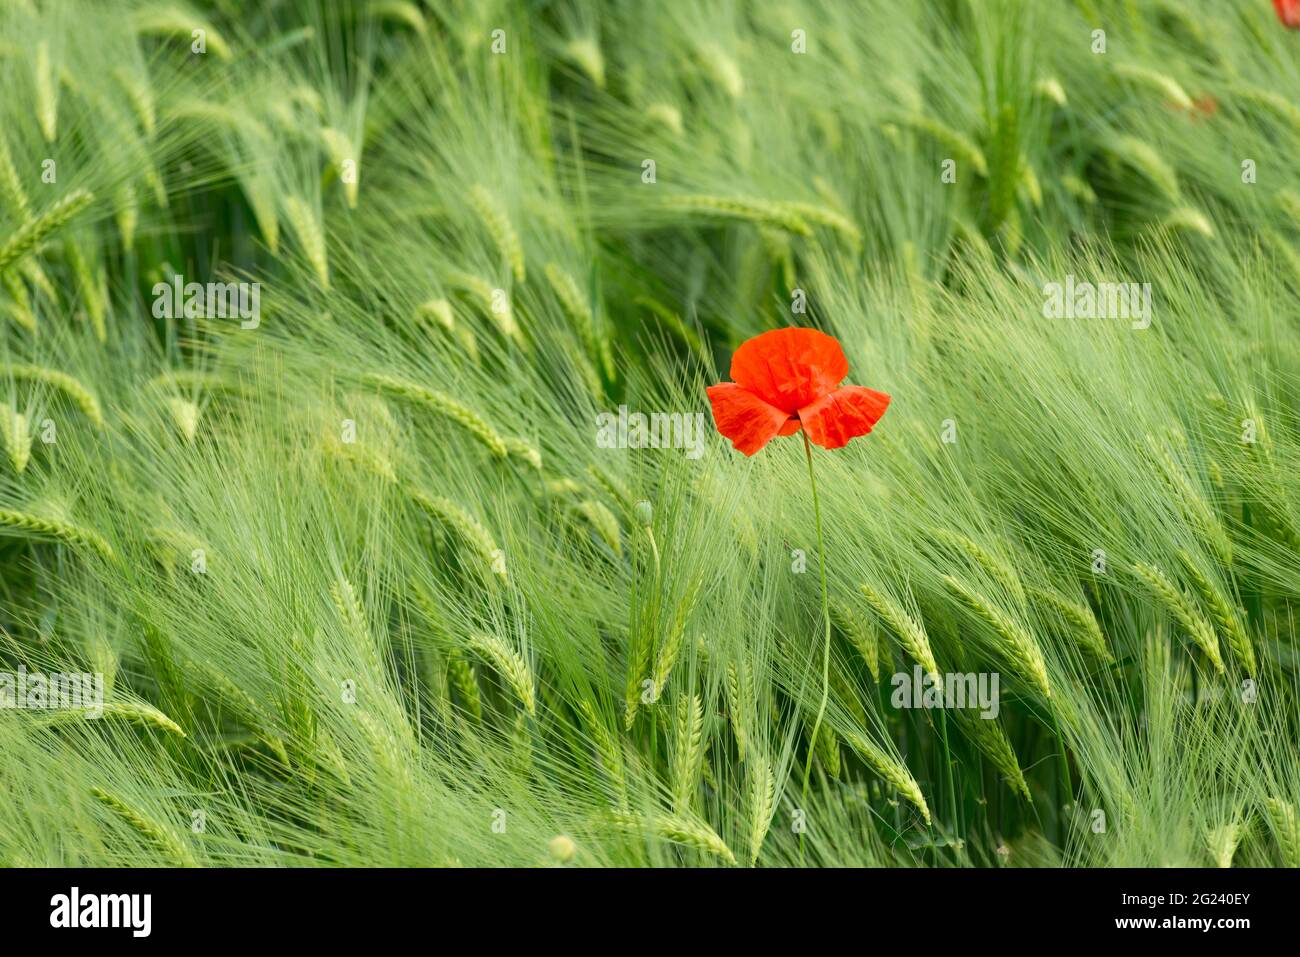 Italy, Lombardy, Countryside near Cremona,  Poppy Flower in The Grain Field Stock Photo